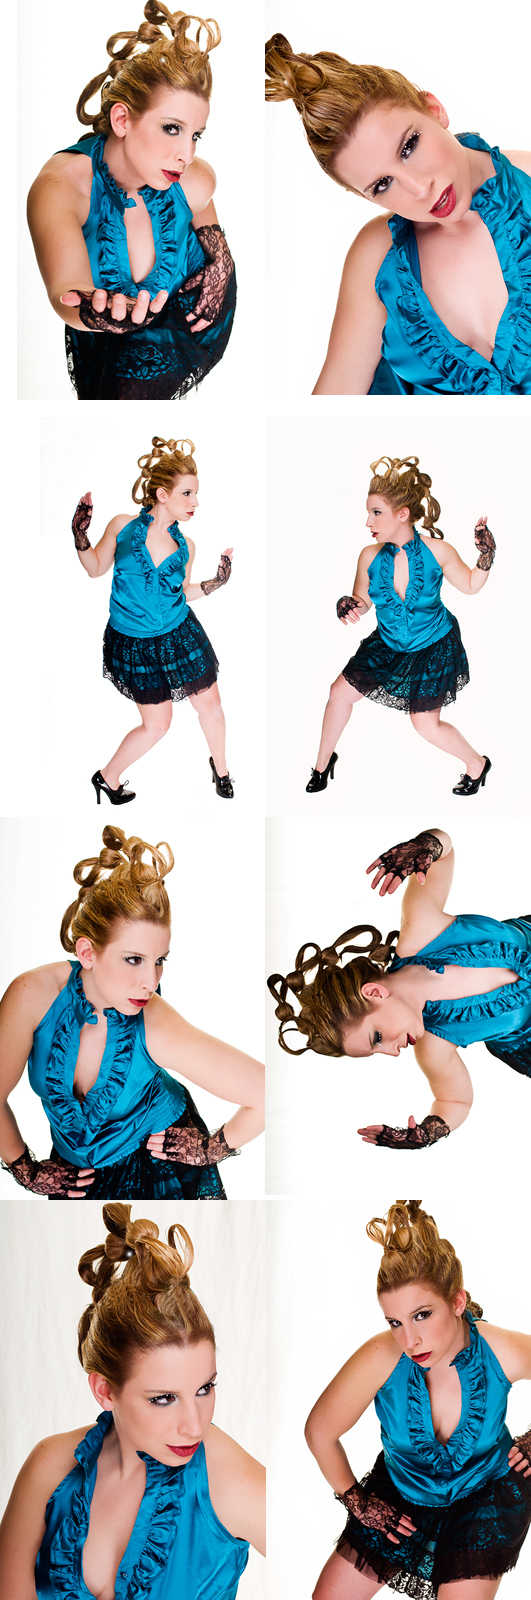 Female model photo shoot of Joy Crowers by Timothy P Hines in Studio / West Chester, PA, hair styled by Newly Styles You